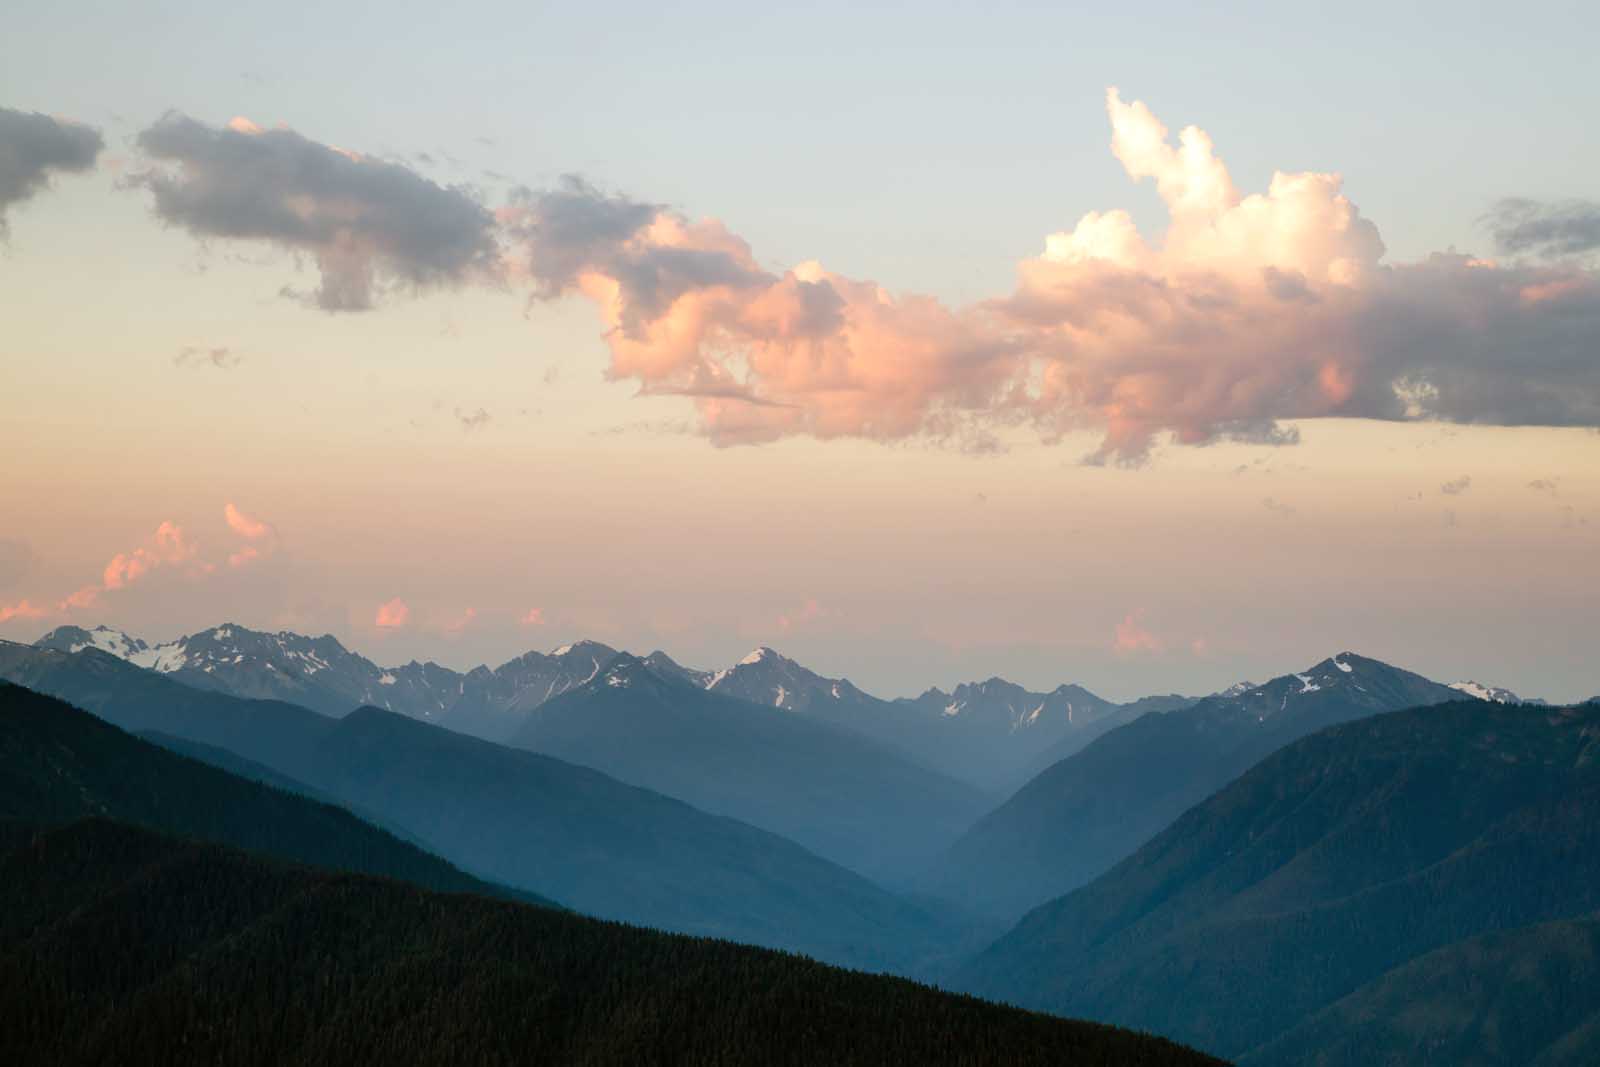 Best Hikes in Olympic National ParkSunrise Ridge Trail